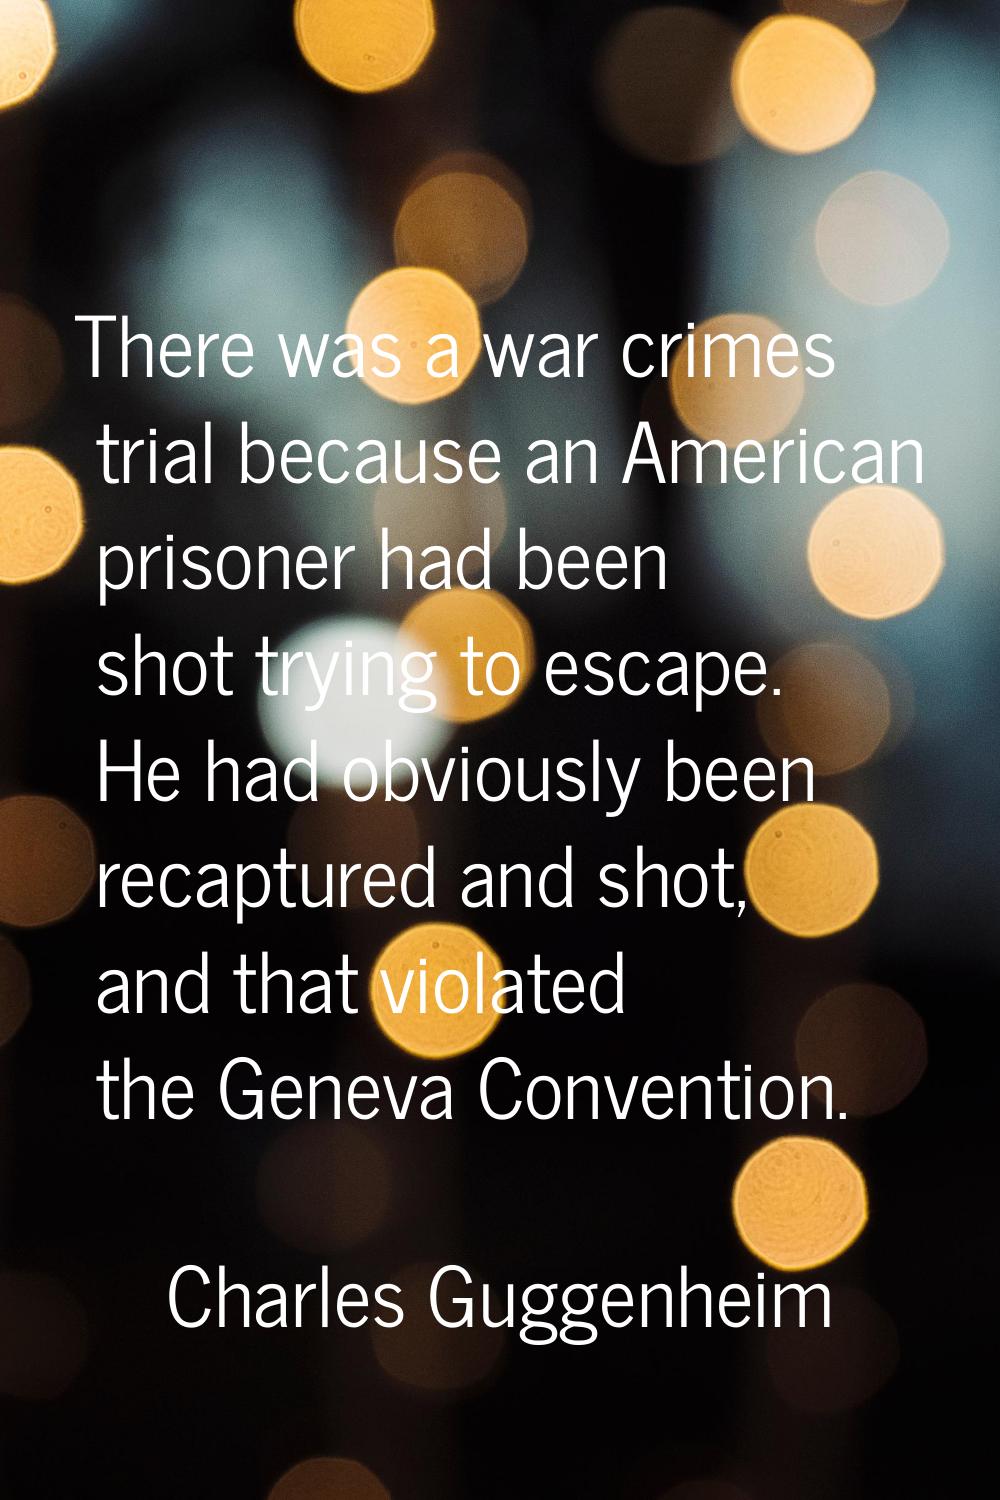 There was a war crimes trial because an American prisoner had been shot trying to escape. He had ob